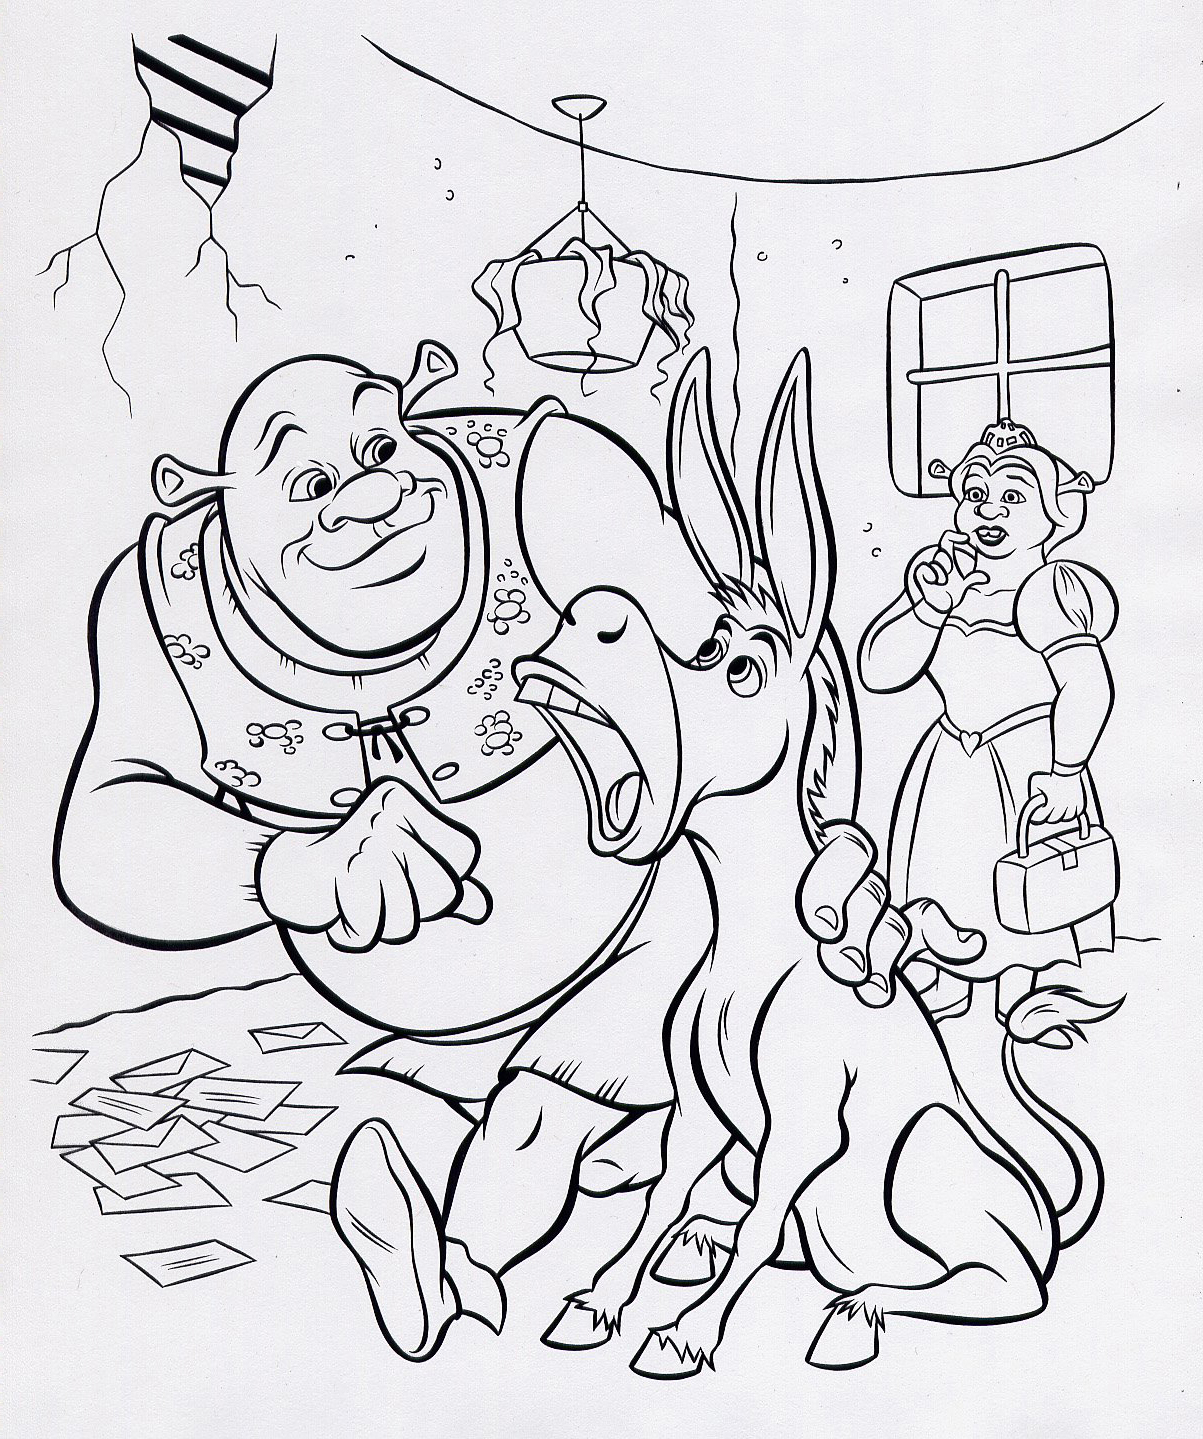 Shrek Coloring Pages, Disney coloring pages